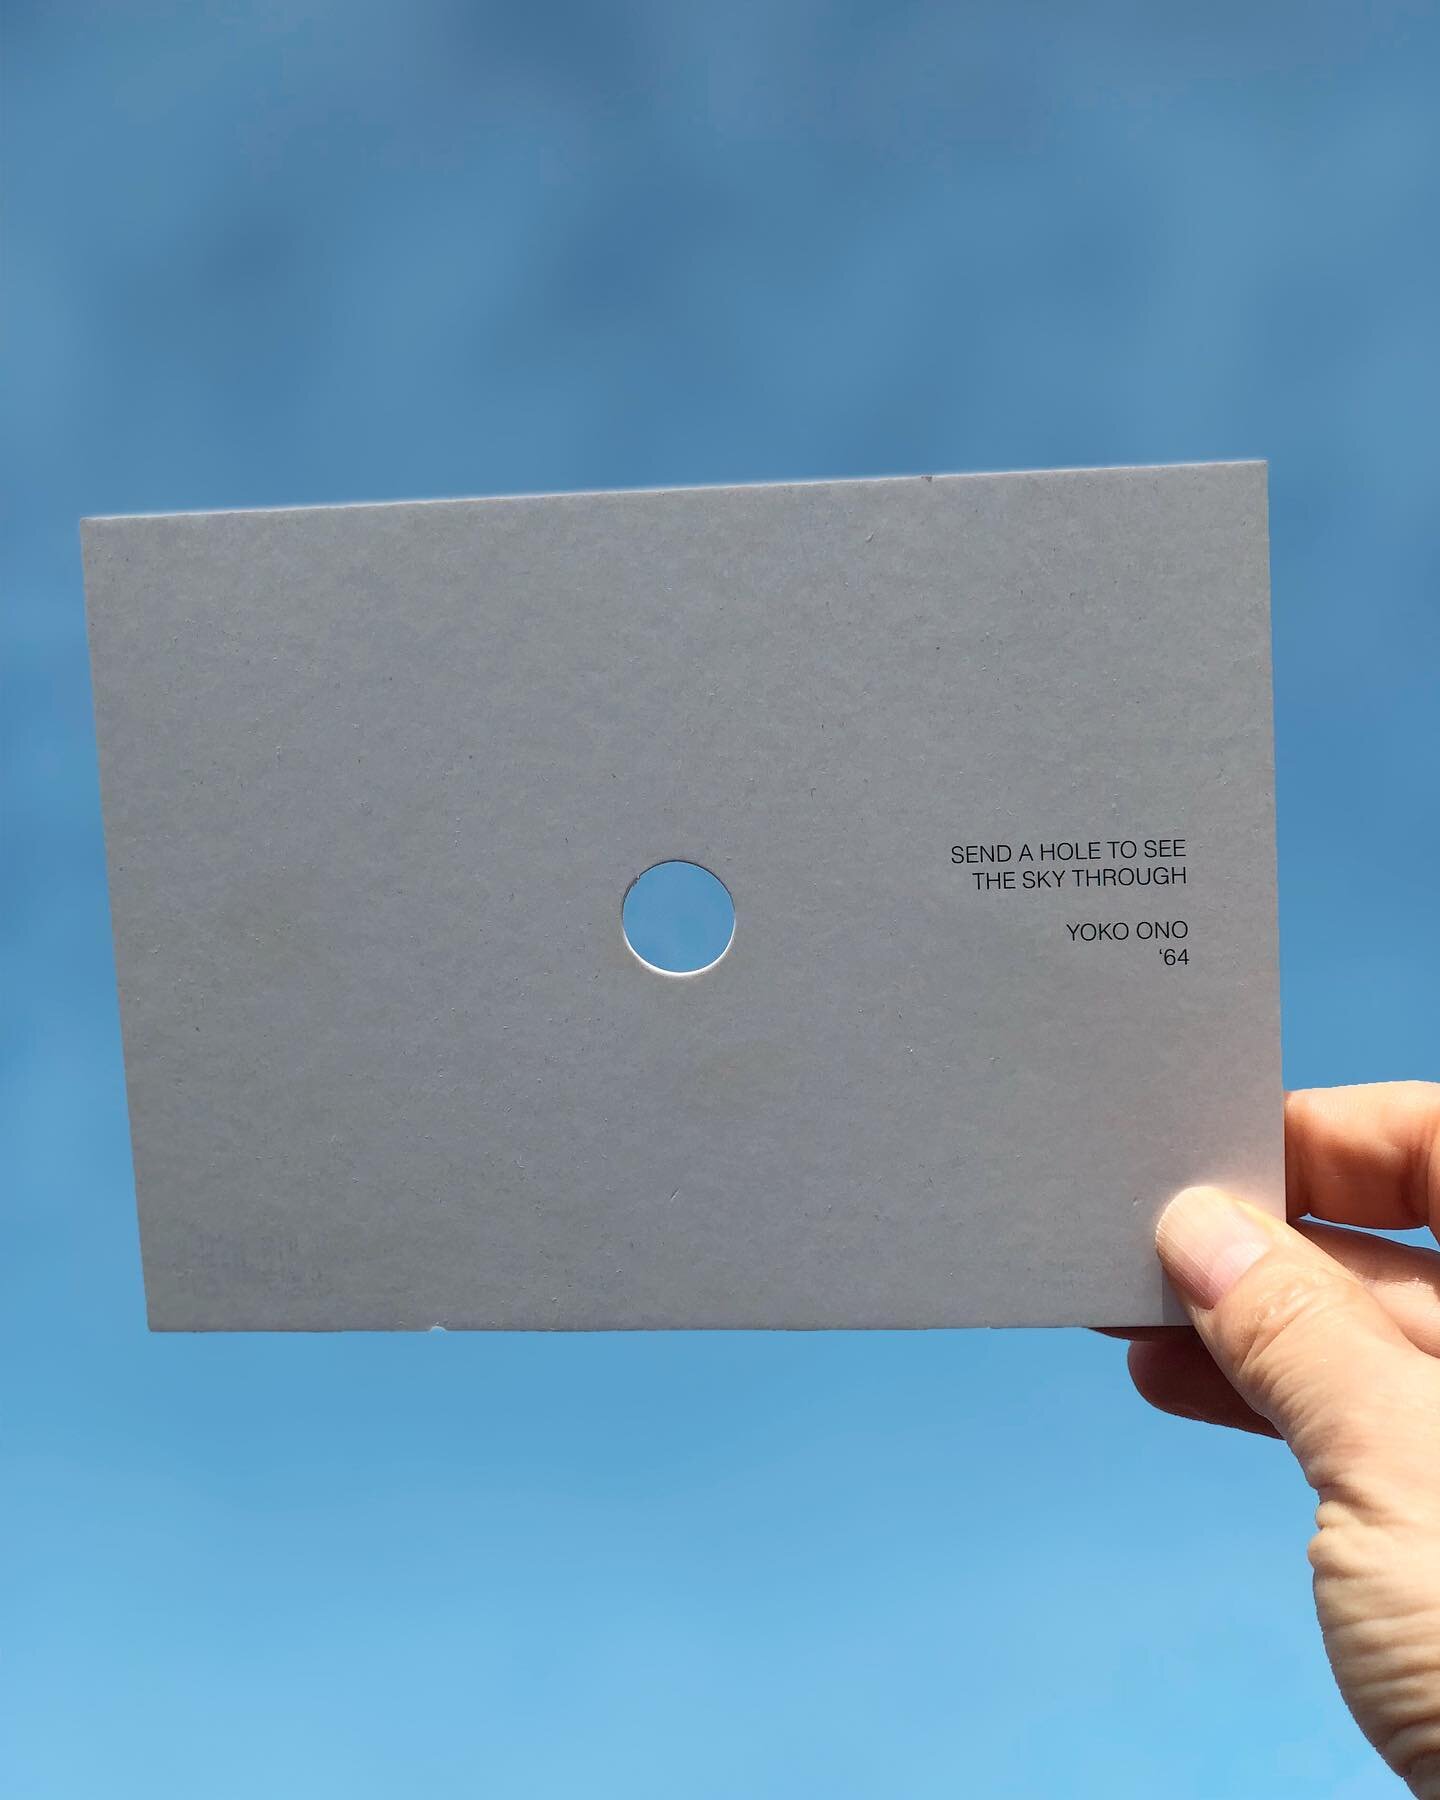 SEND A HOLE TO SEE THE SKY THROUGH - YOKO ONO &lsquo;64
⁣
I love Yoko Ono&rsquo;s &ldquo;scores&rdquo; - a collection of poetic, playful directives to shift our perspective. ⁣
I love this one in particular.⁣
⁣
She reminds us to look at the world afre